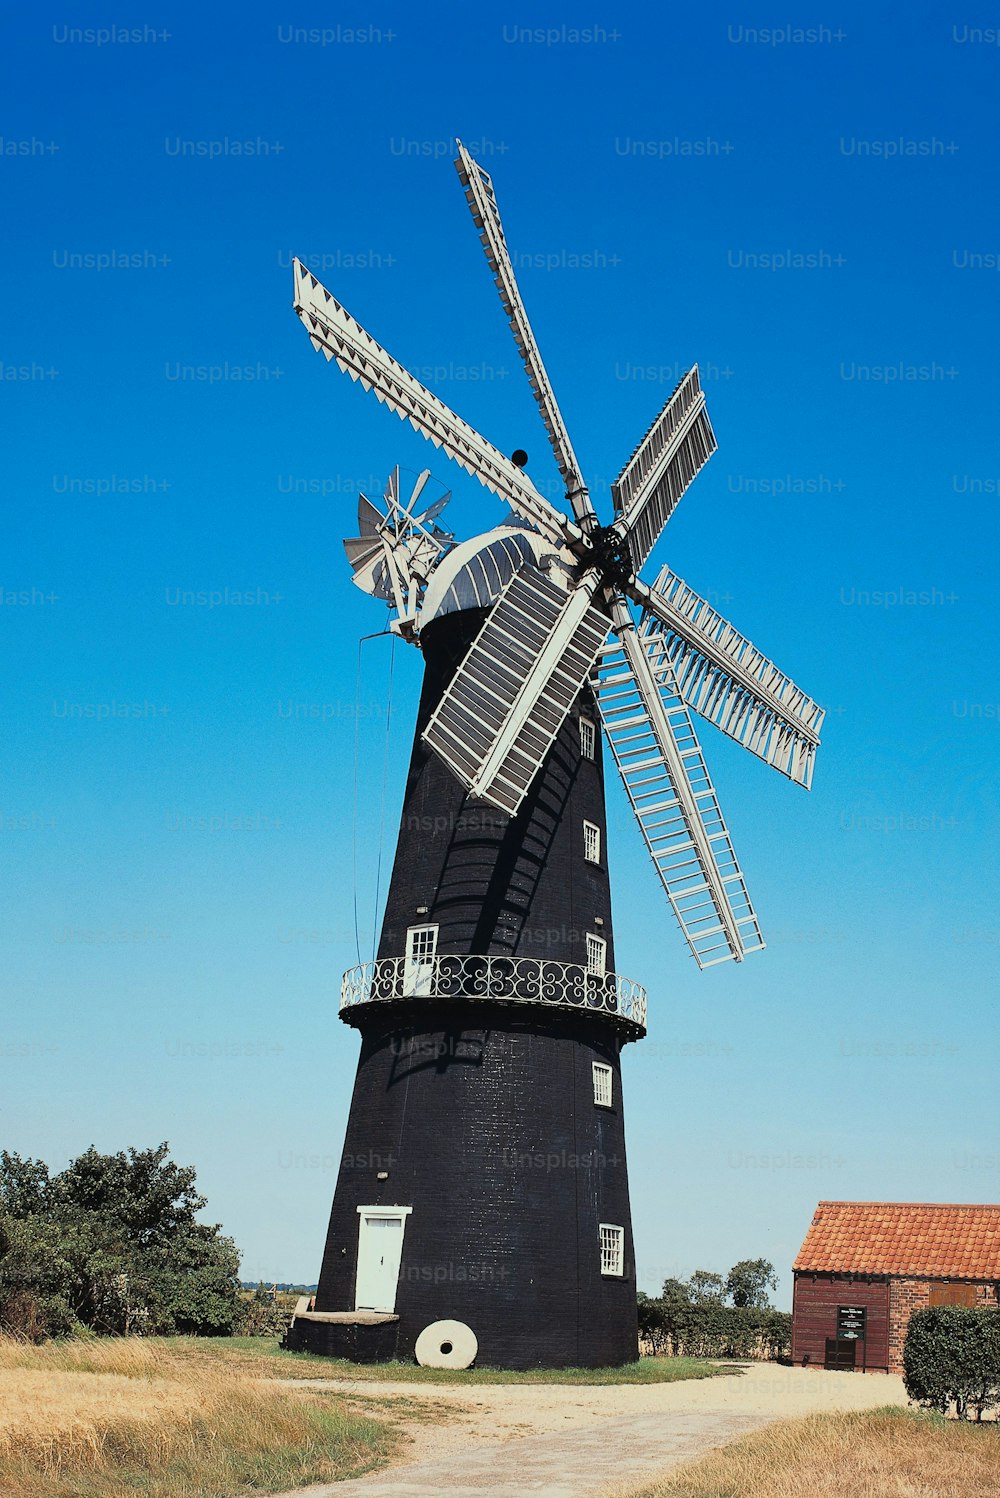 a windmill in a field with a blue sky in the background